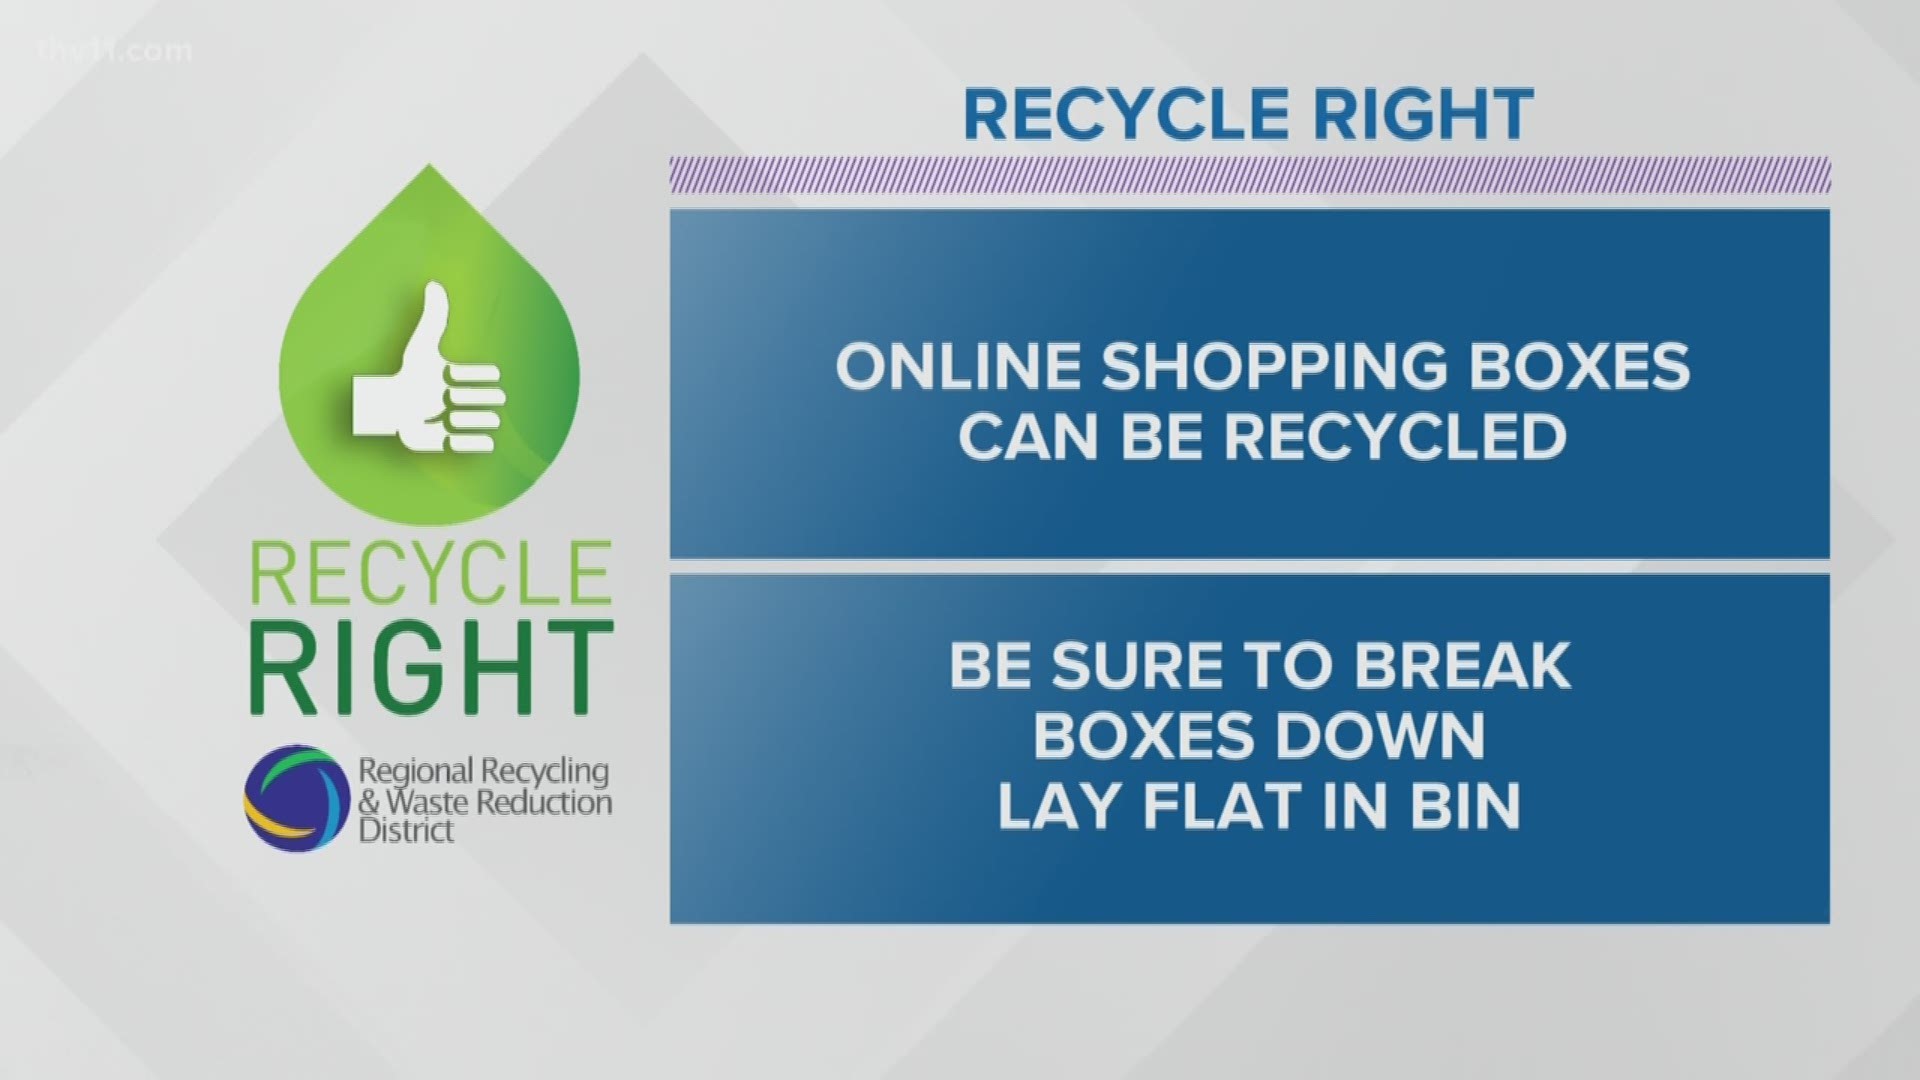 Chief Meteorologist Ed Buckner with your Recycle Right tip of the week for week 28.